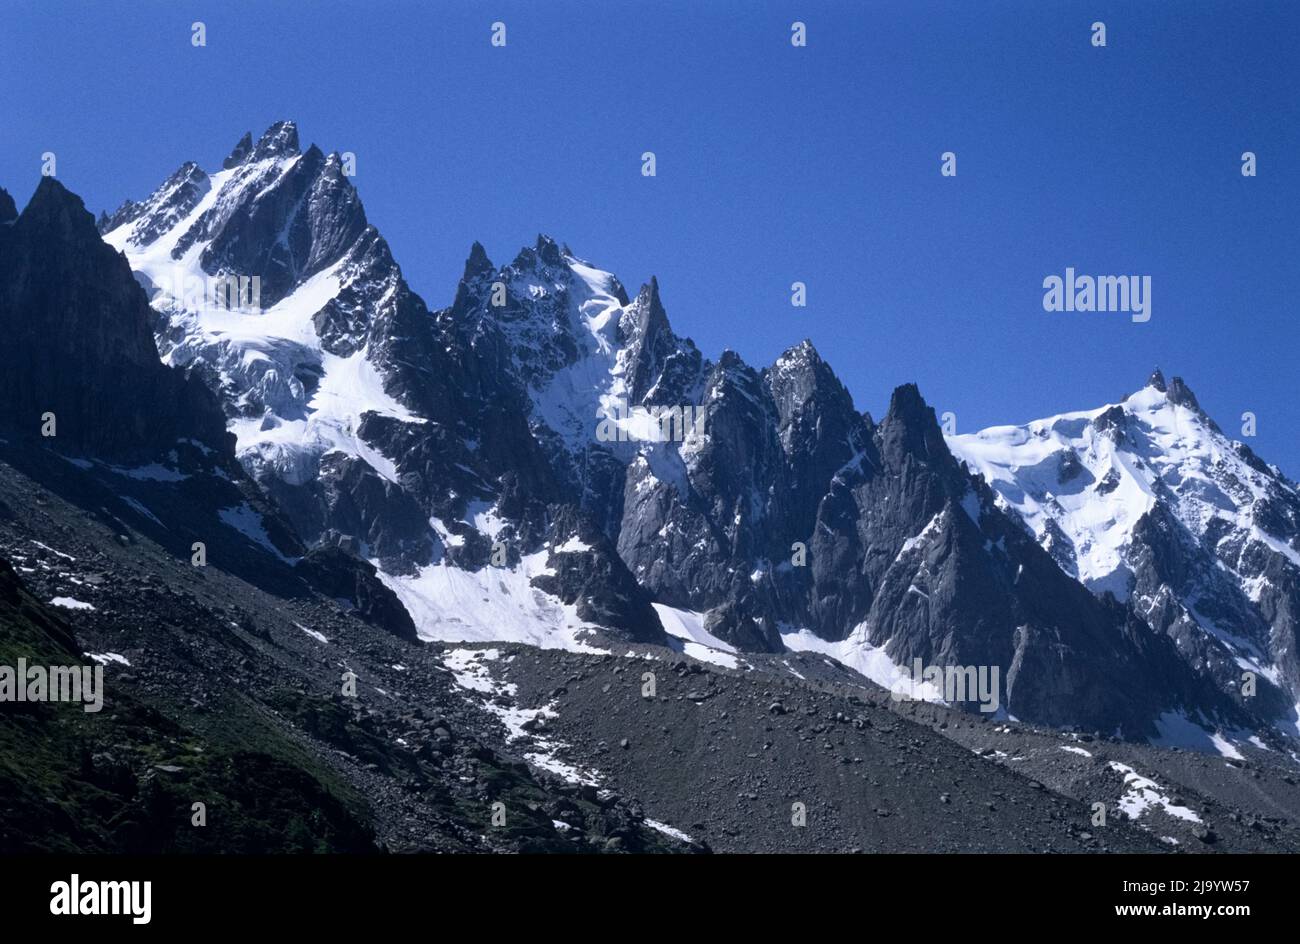 On Grand Balcon Nord, The Aiguilles de Chamonix with Aiguilles du Midi from Plan d'Aiguille to Montenvers hiking trial, Chamonix, France,1990 Stock Photo